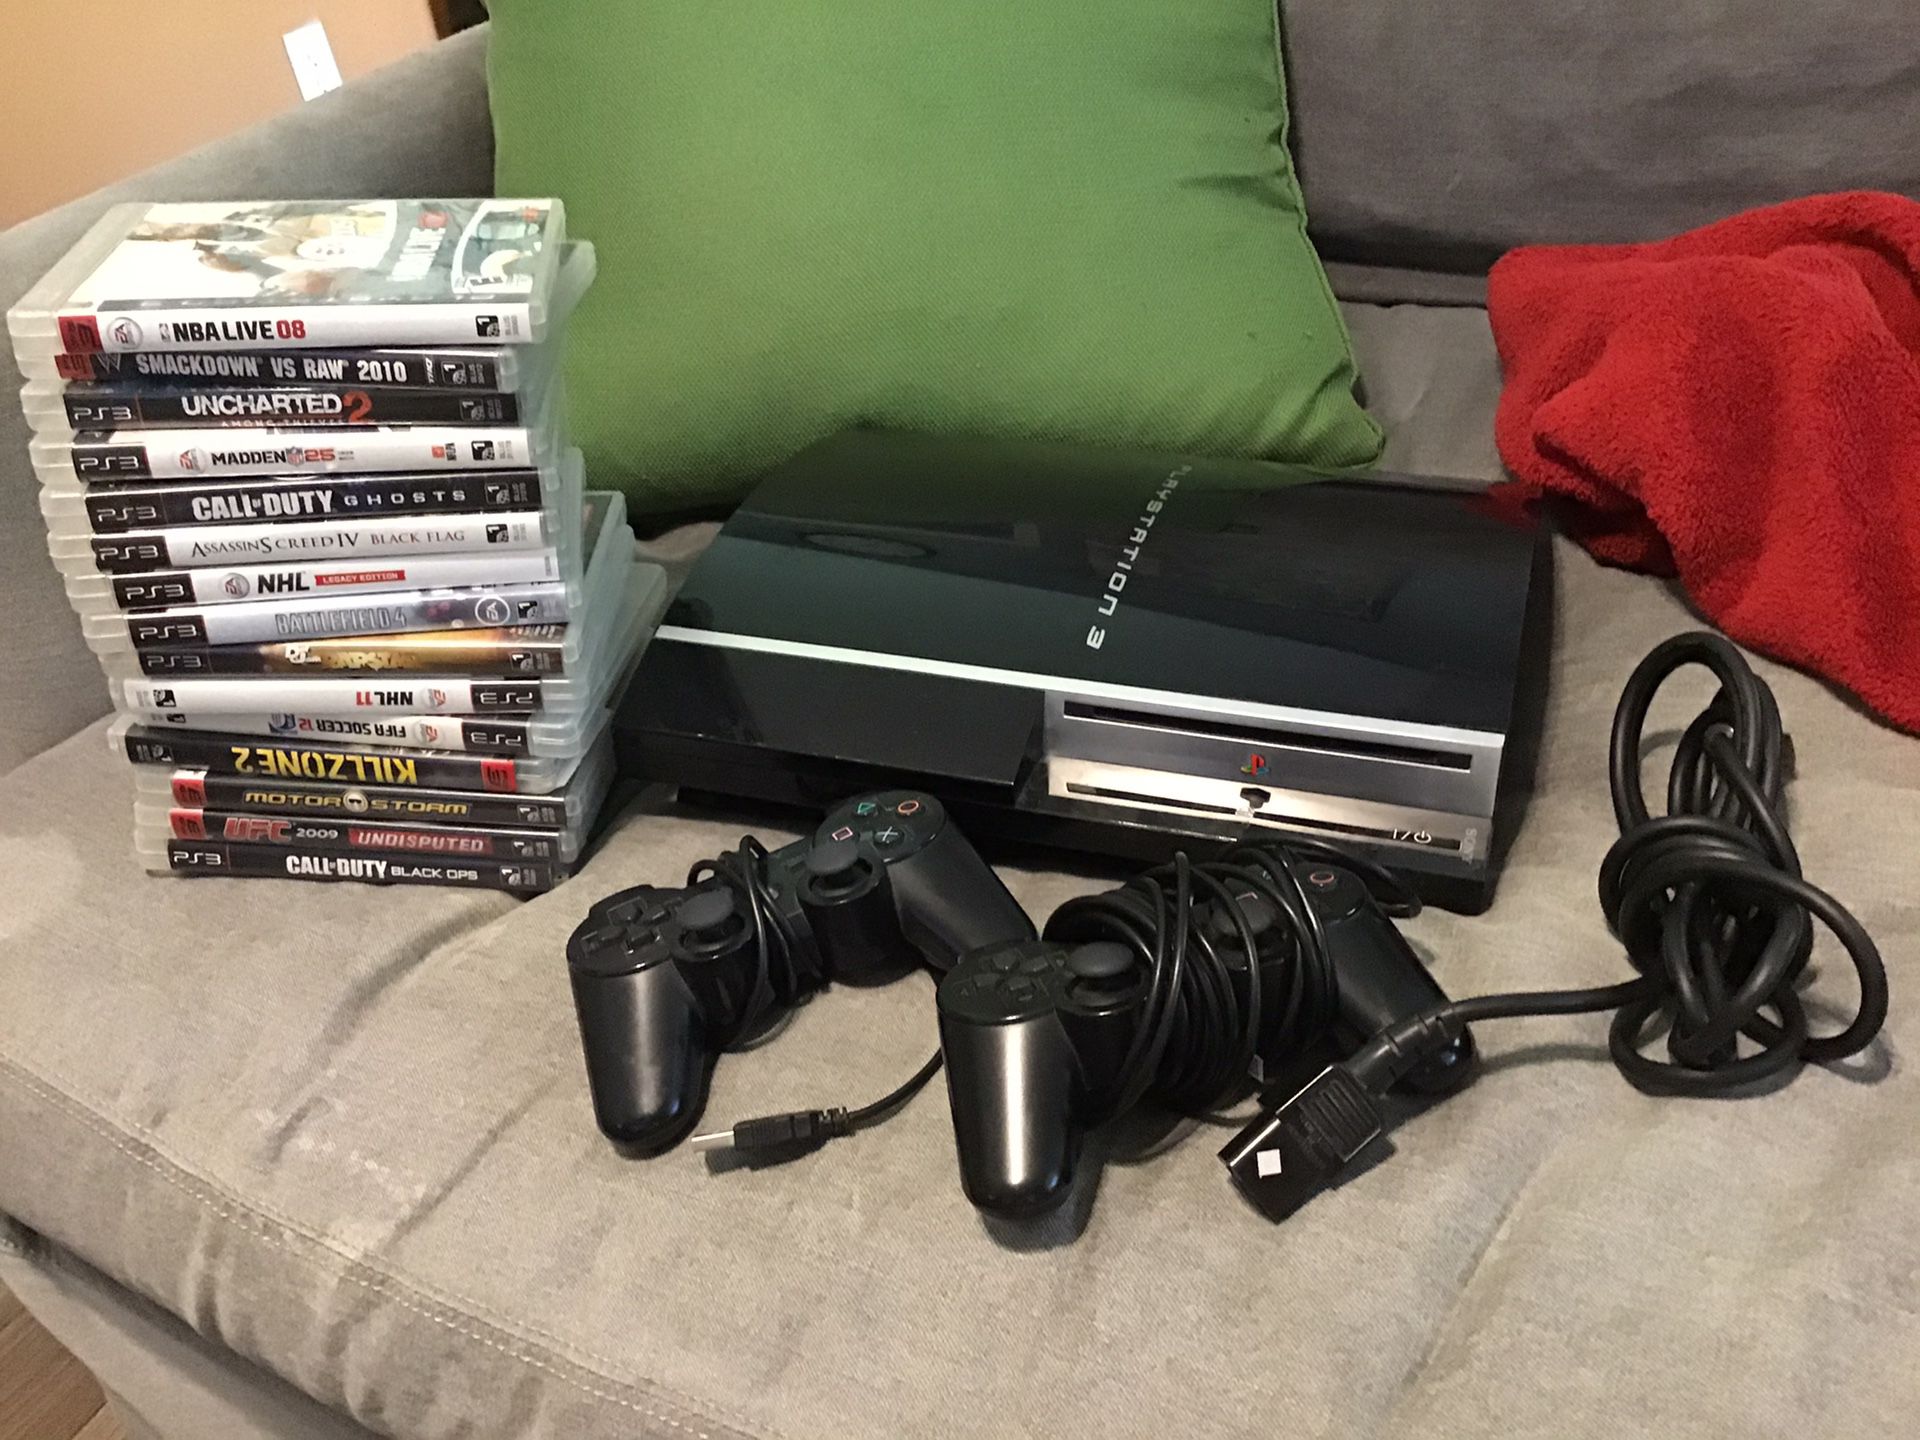 Sony PlayStation 3 w 15 Assorted game disks and all connections complete ...Price Firm Solid